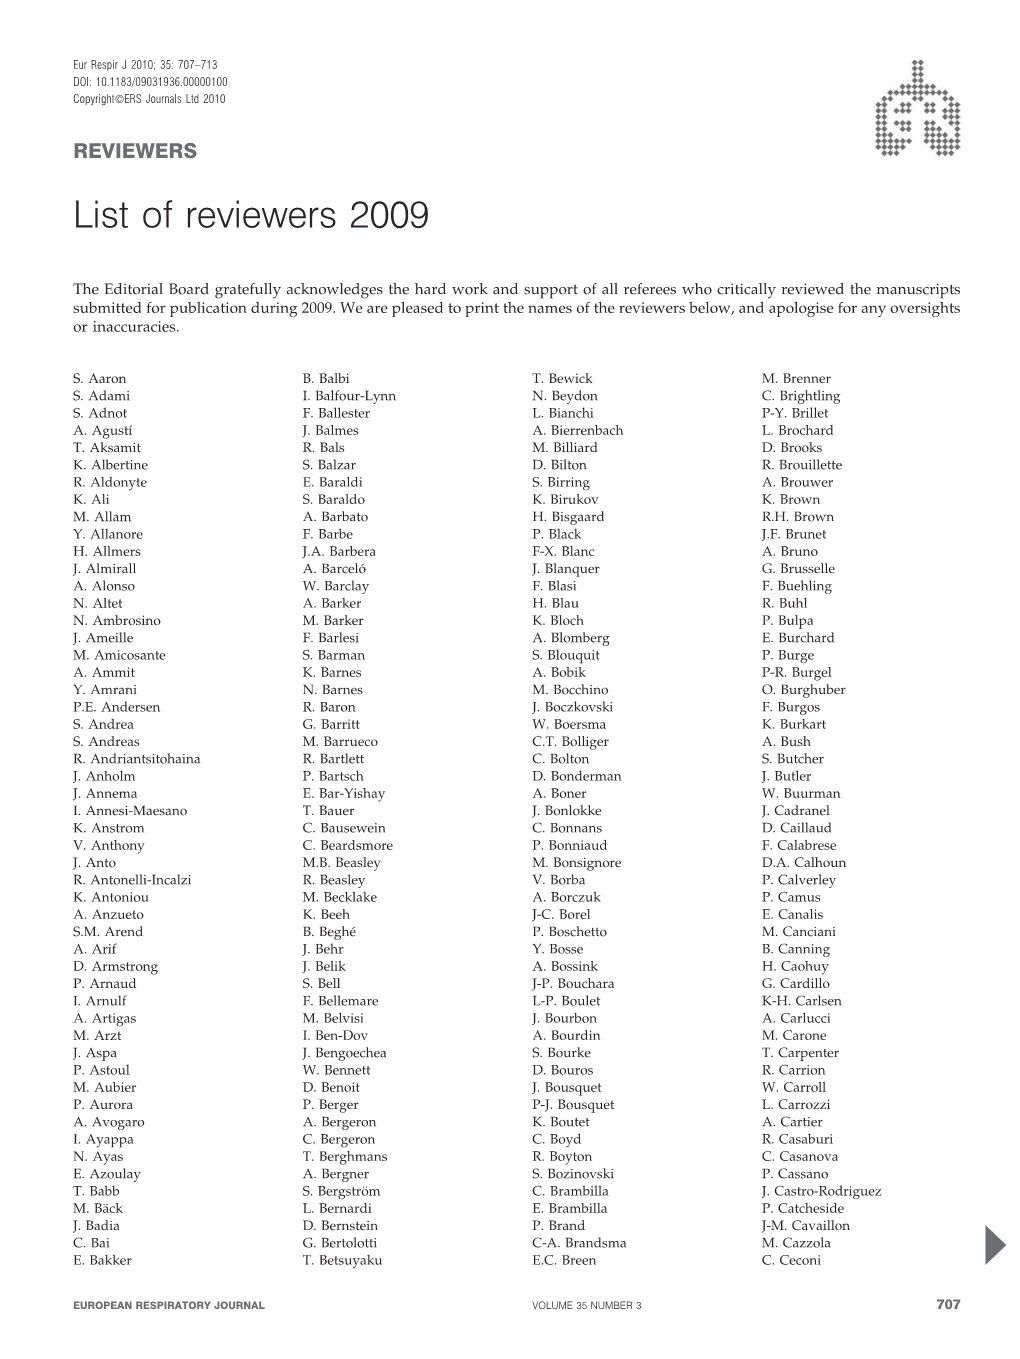 List of Reviewers 2009